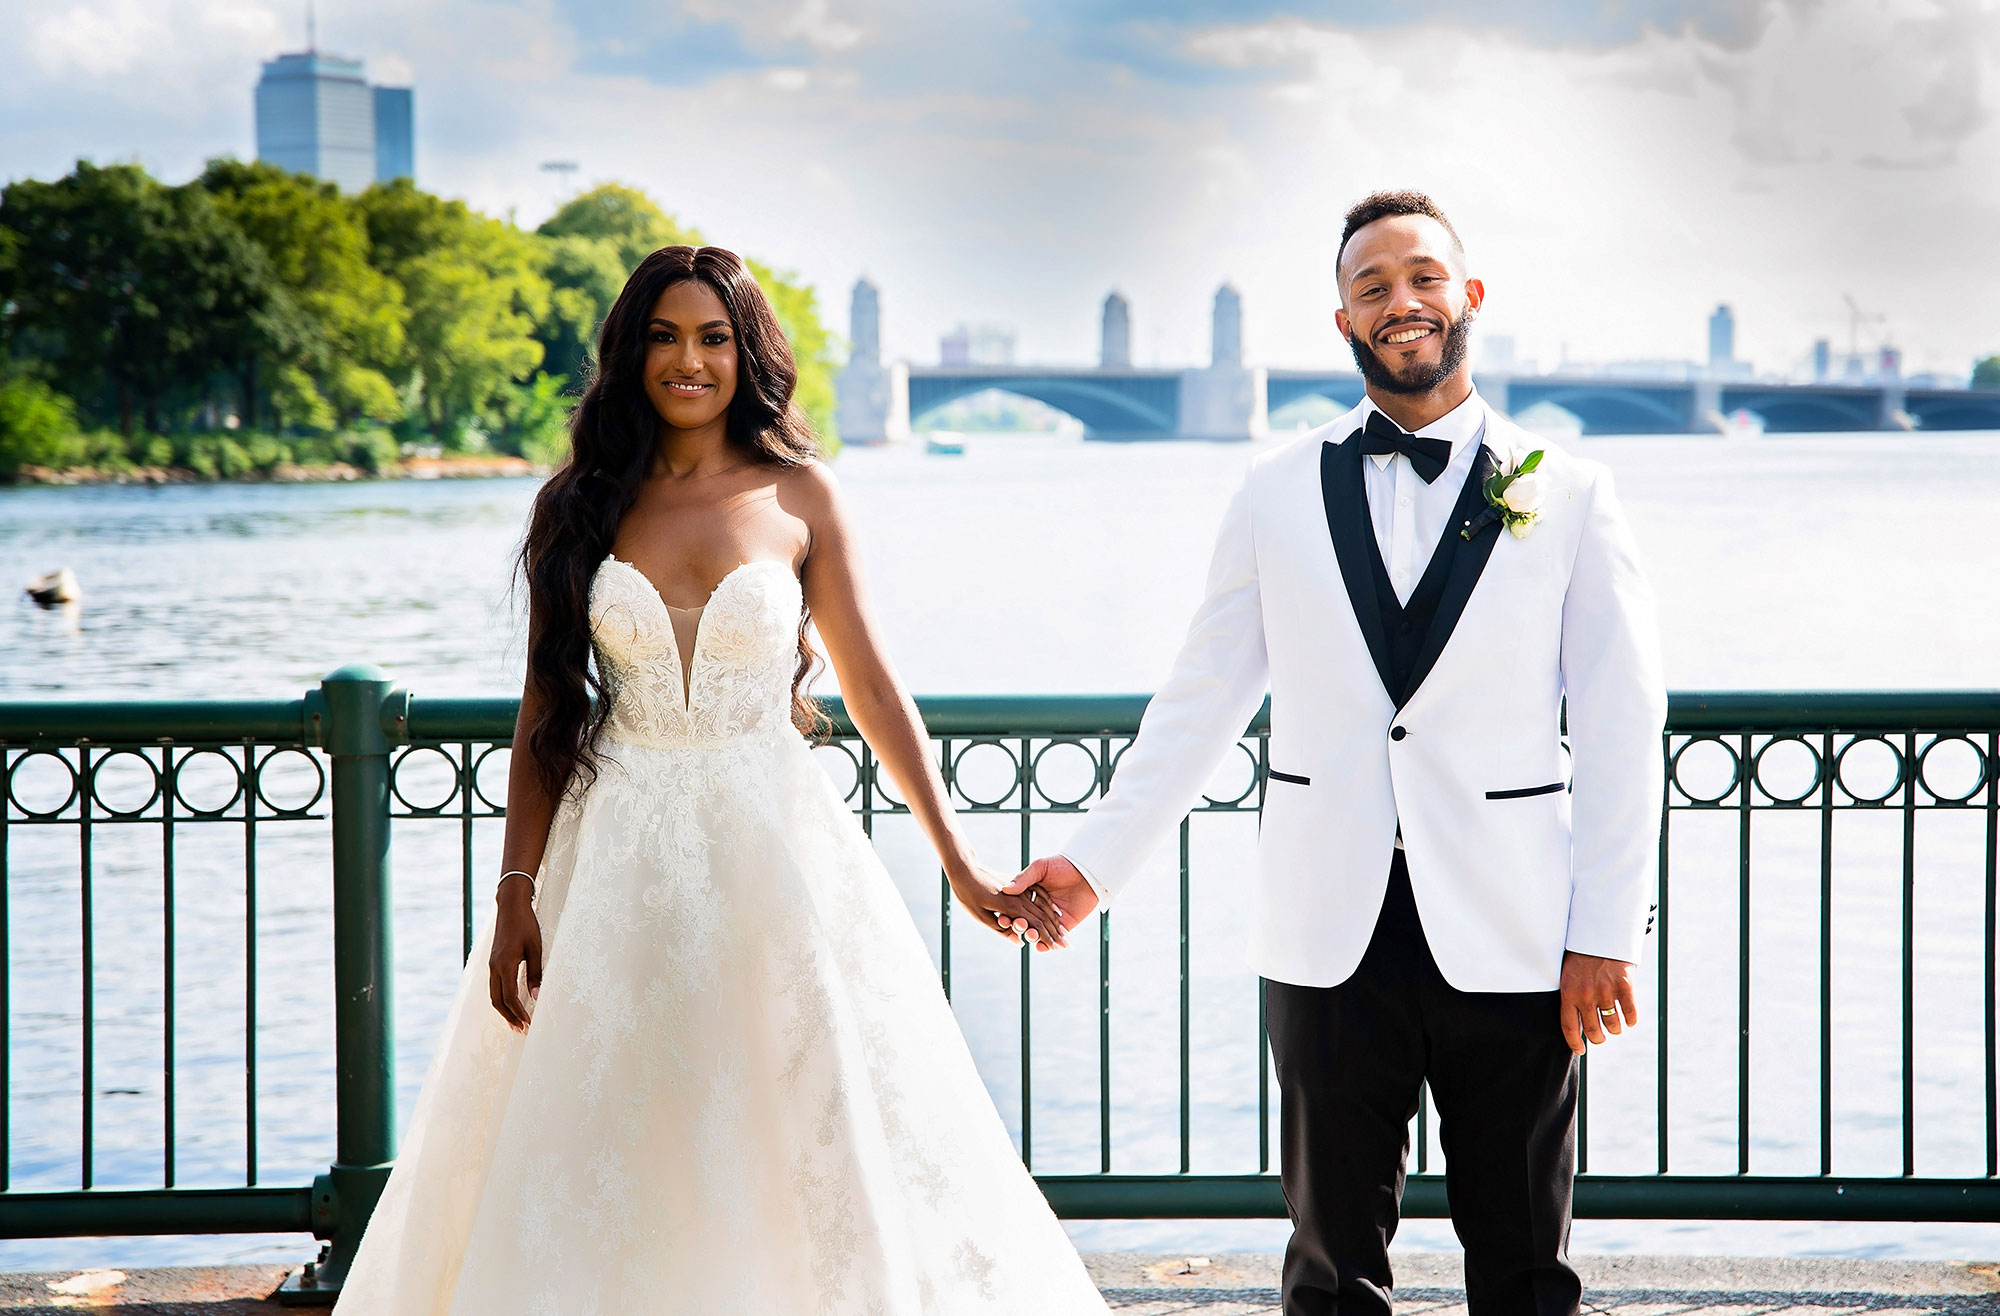 ‘Married at First Sight’ Season 14 - FINALE!